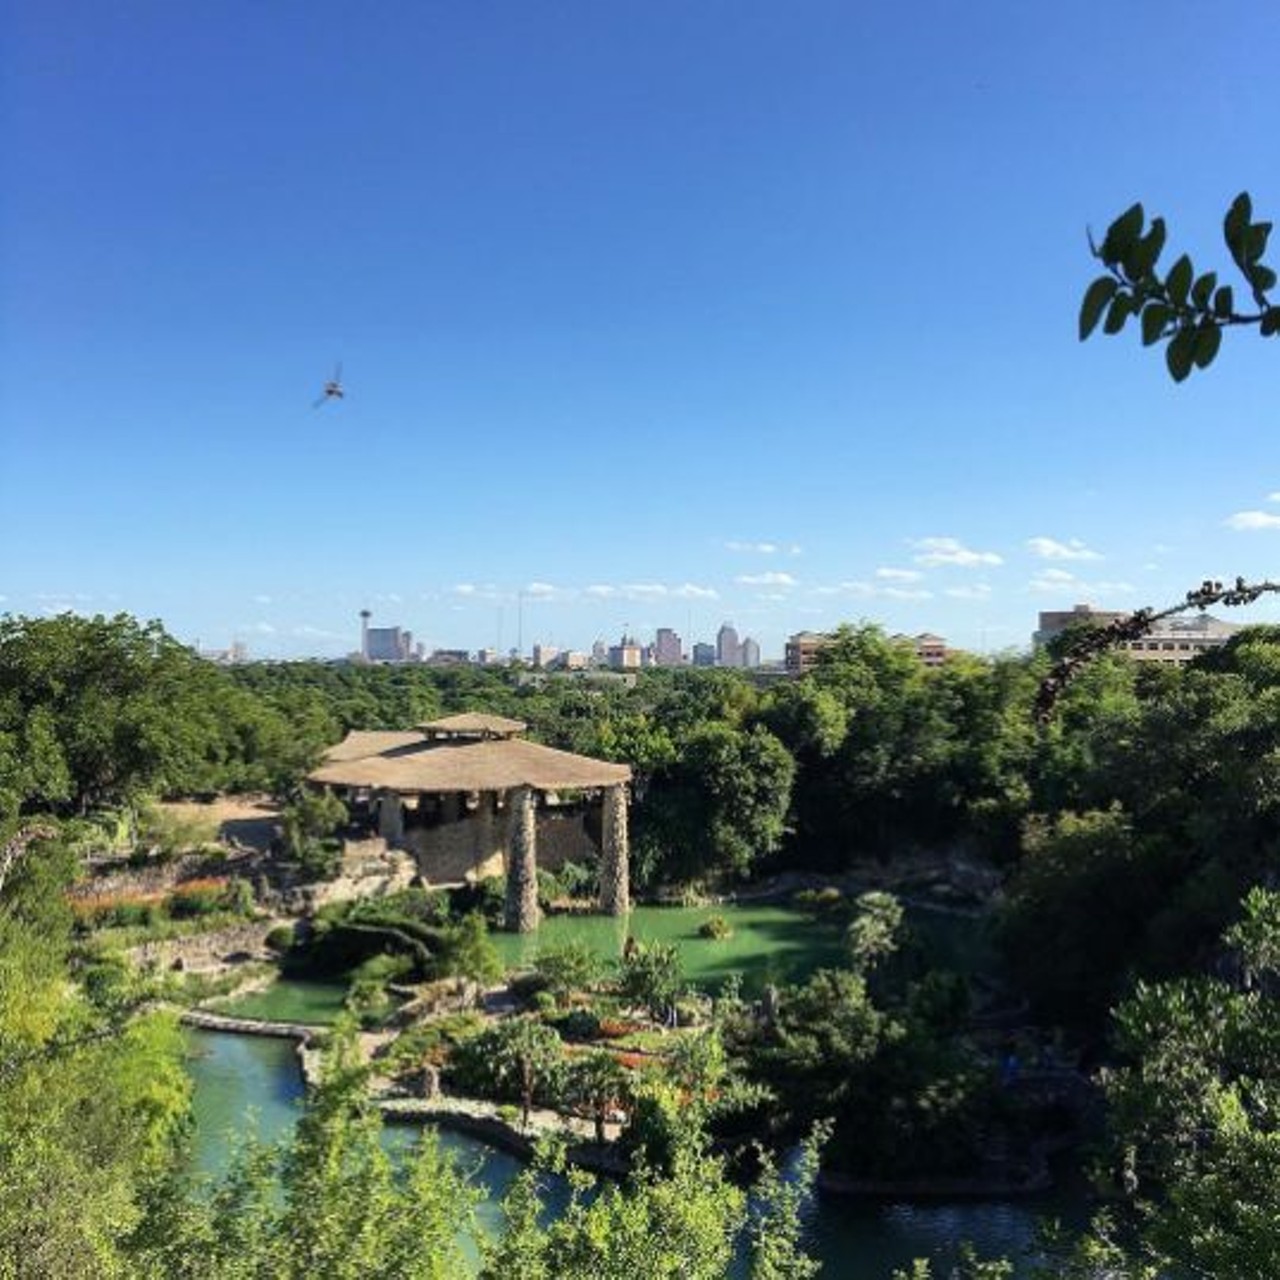 Japanese Tea Gardens 
3853 N. St. Mary&#146;s St., (210) 559-3148 
Head to the Japanese Tea Gardens with a special person for a date that you&#146;ll both love. 
Photo via Instagram, satx_views